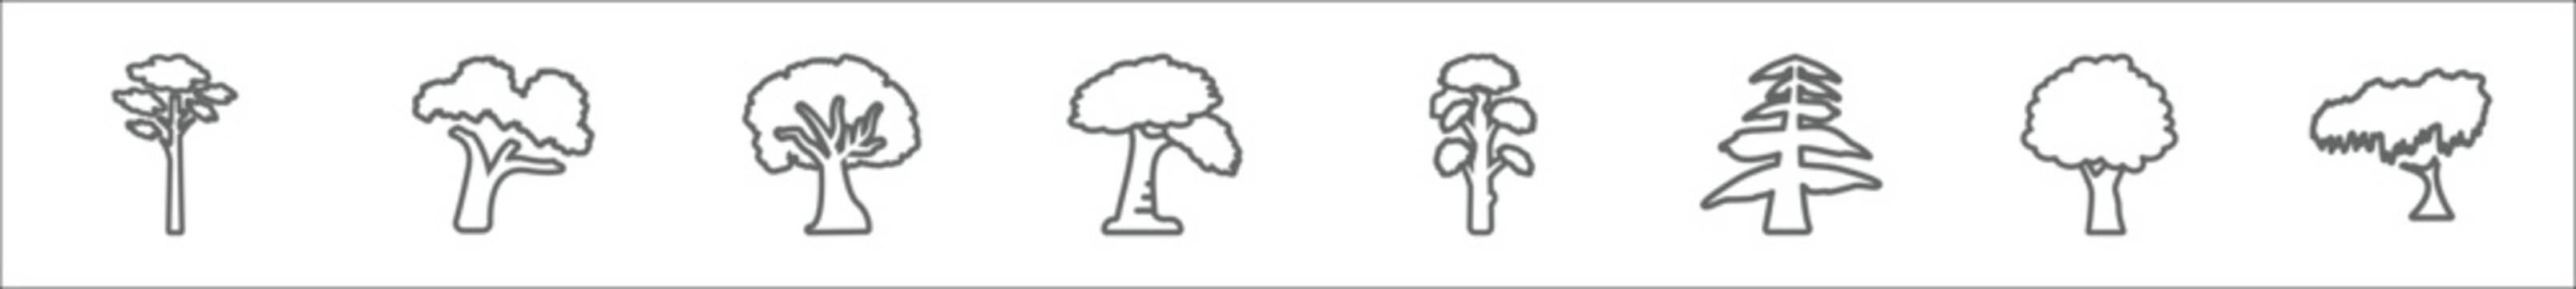 outline set of nature line icons. linear vector icons such as pitch pine tree, shagbark hickory tree, sycamore tree, pin cherry slippery elm eastern hemlock butternut black willow